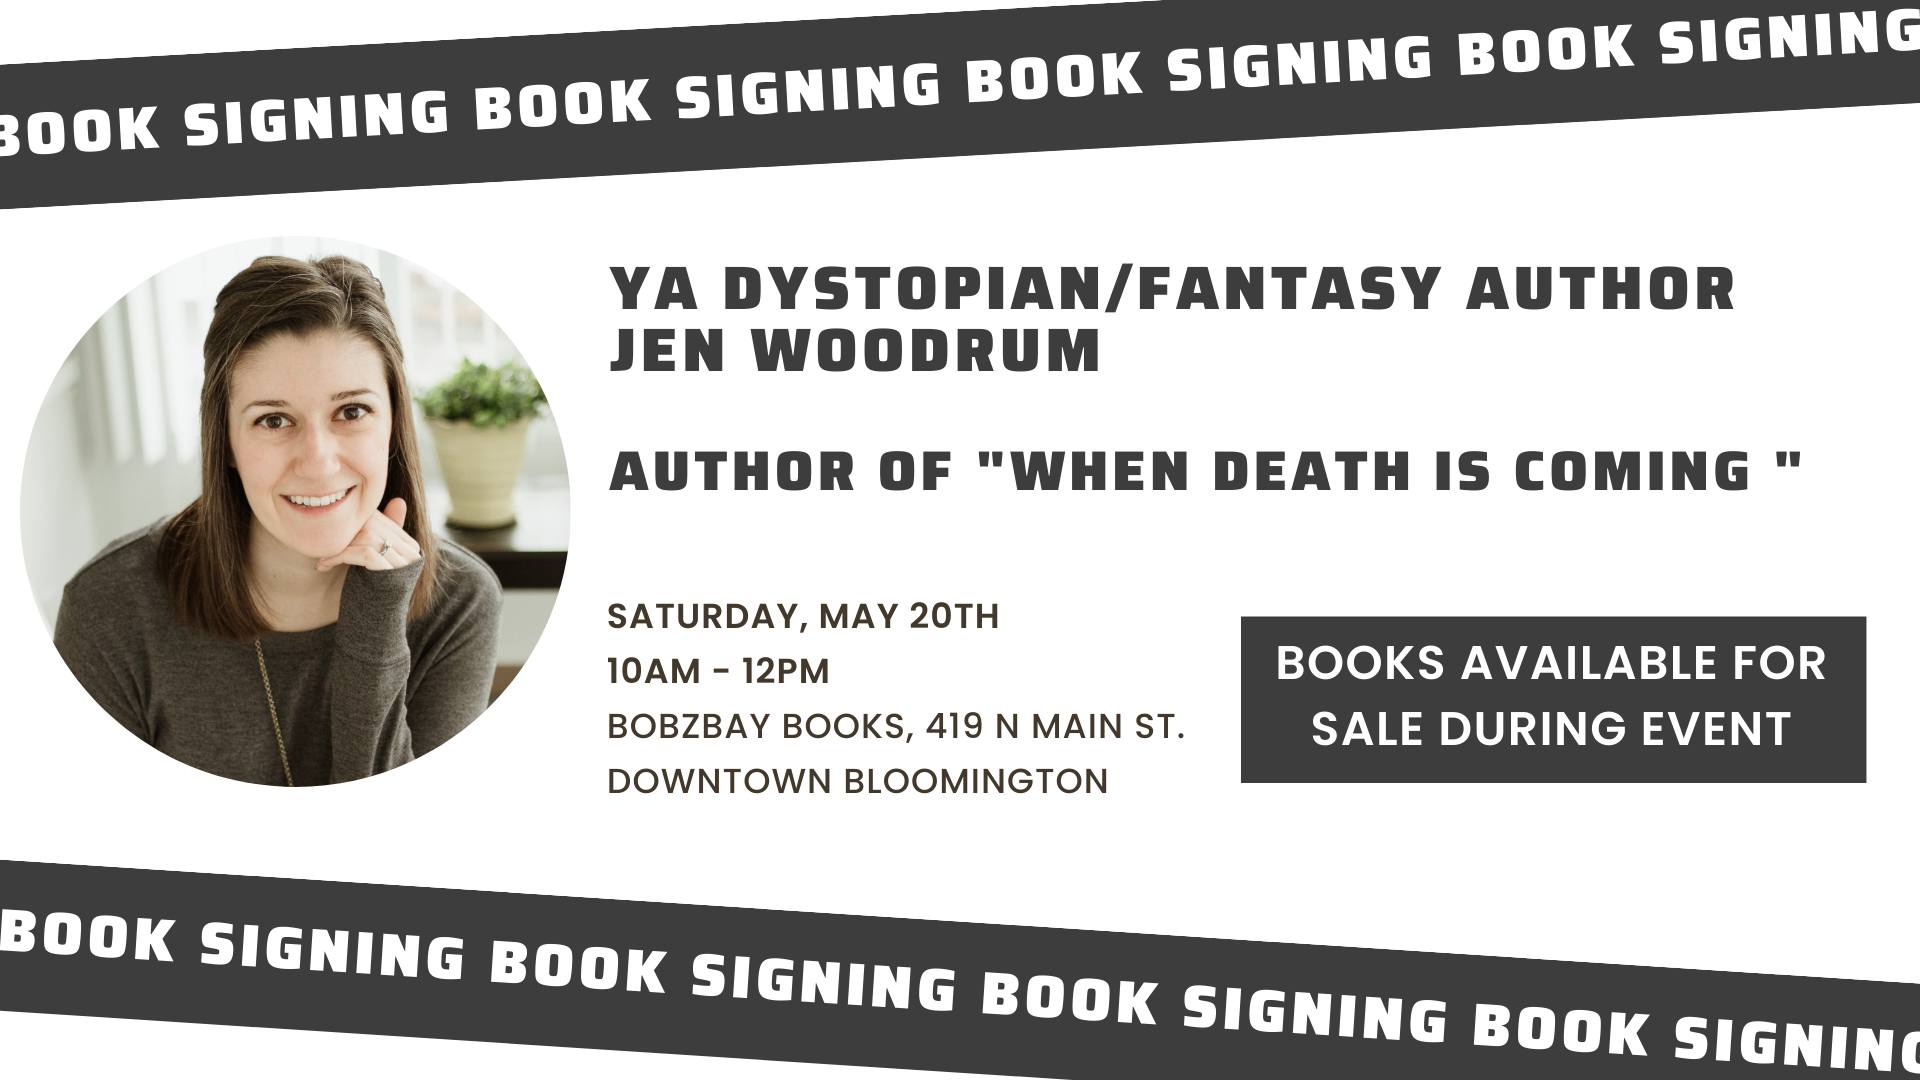 Local Young Adult Dystopian Fantasy Author Jen Woodrum Book Signing at Bobzbay Books